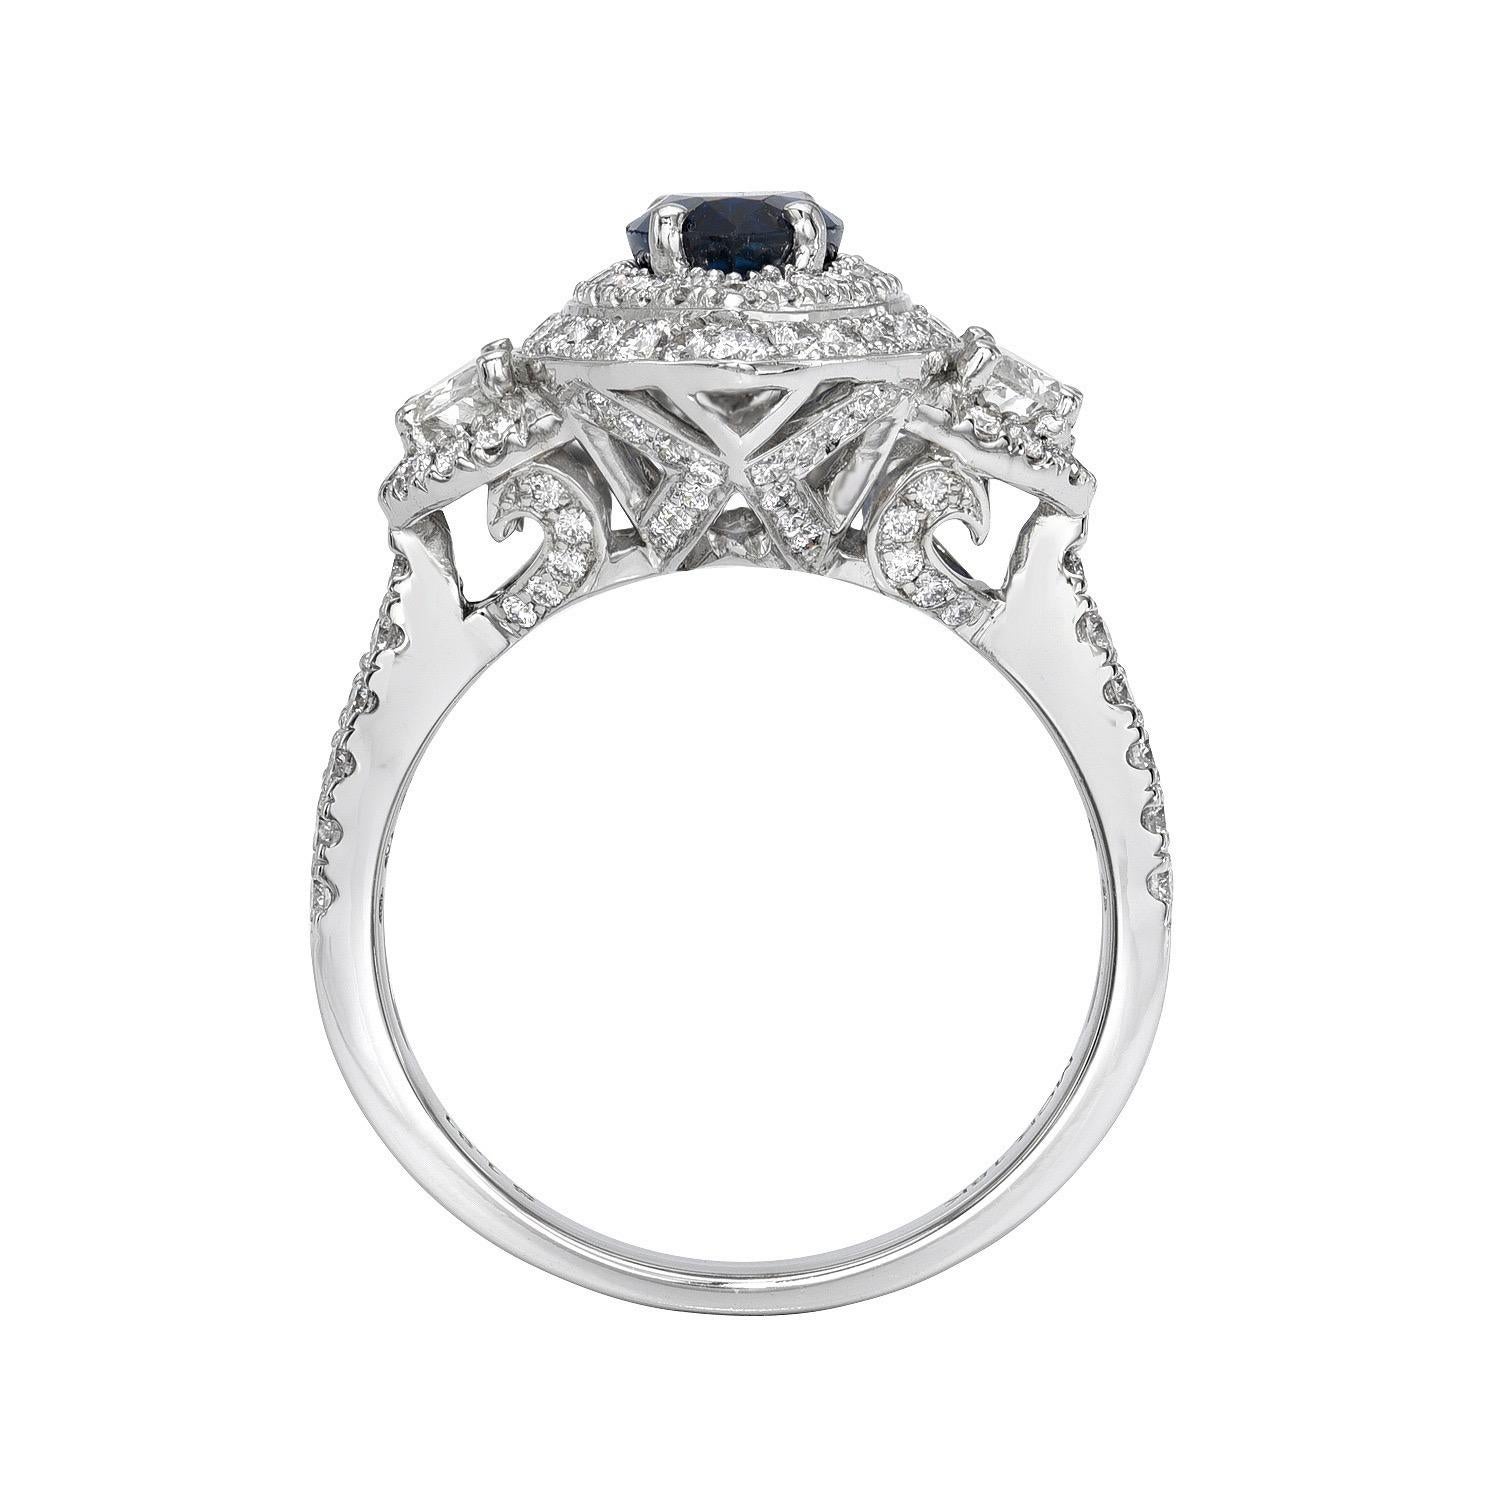 Splendid 1.81 carat Blue Sapphire marquise, 18K white gold ring, decorated with round brilliant diamonds totaling 0.89 carats and a pair of 0.31 carat half moon diamonds.
Ring size 6.5. Resizing is complementary upon request.
Returns are accepted